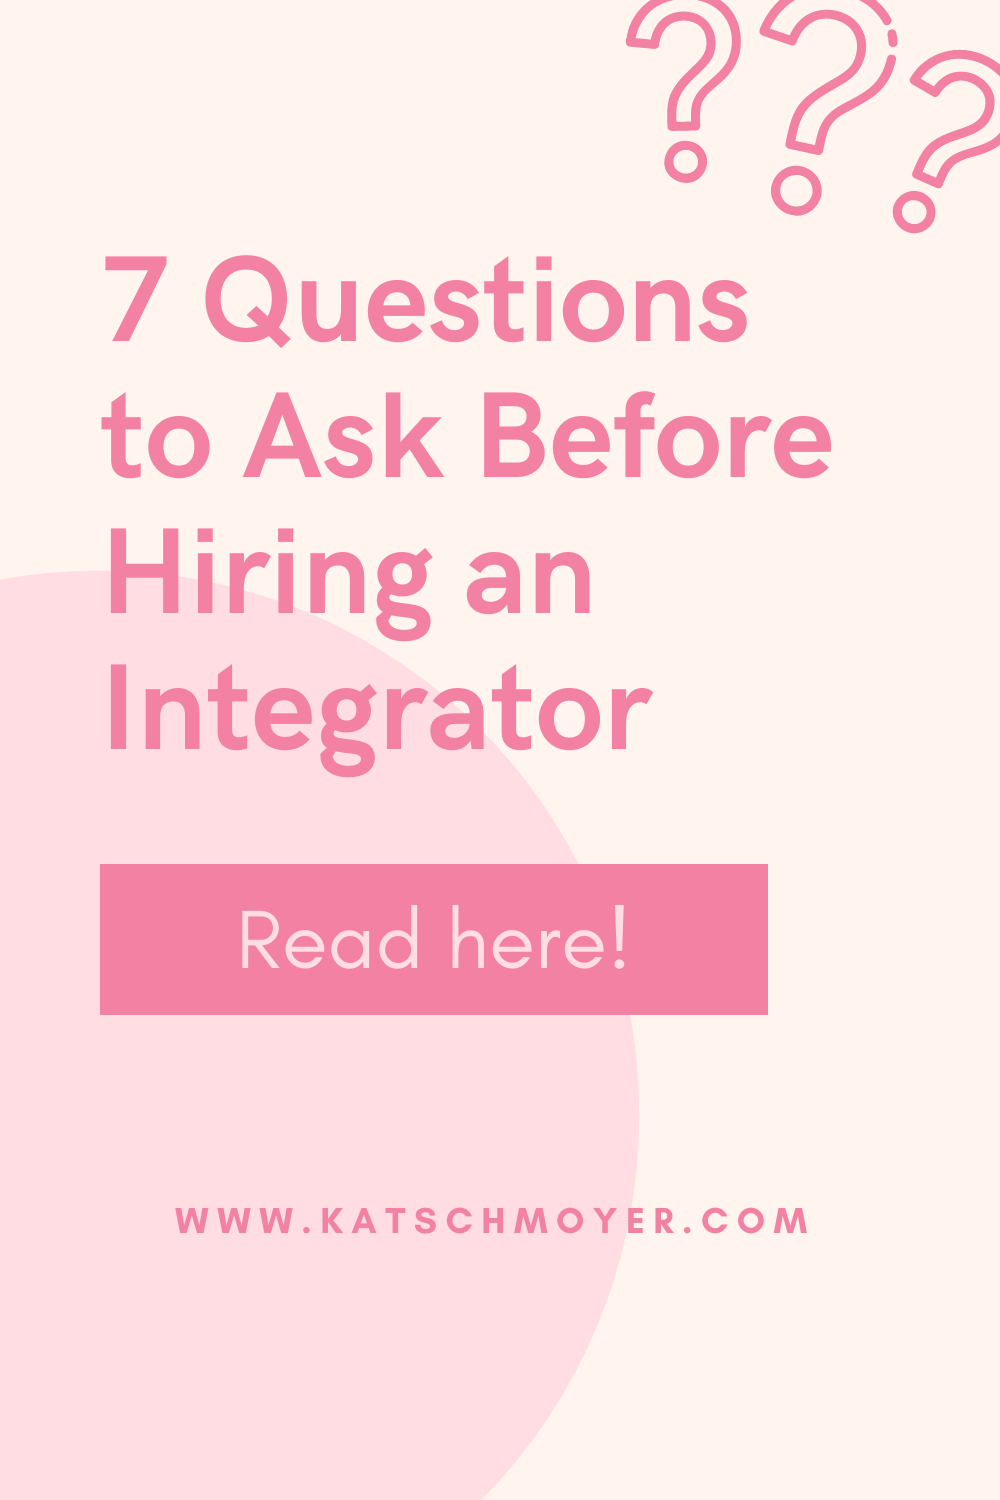 7 Questions to Ask Before Hiring an Integrator as a Small Business Owner: shared by integrator and business coach Kat Schmoyer